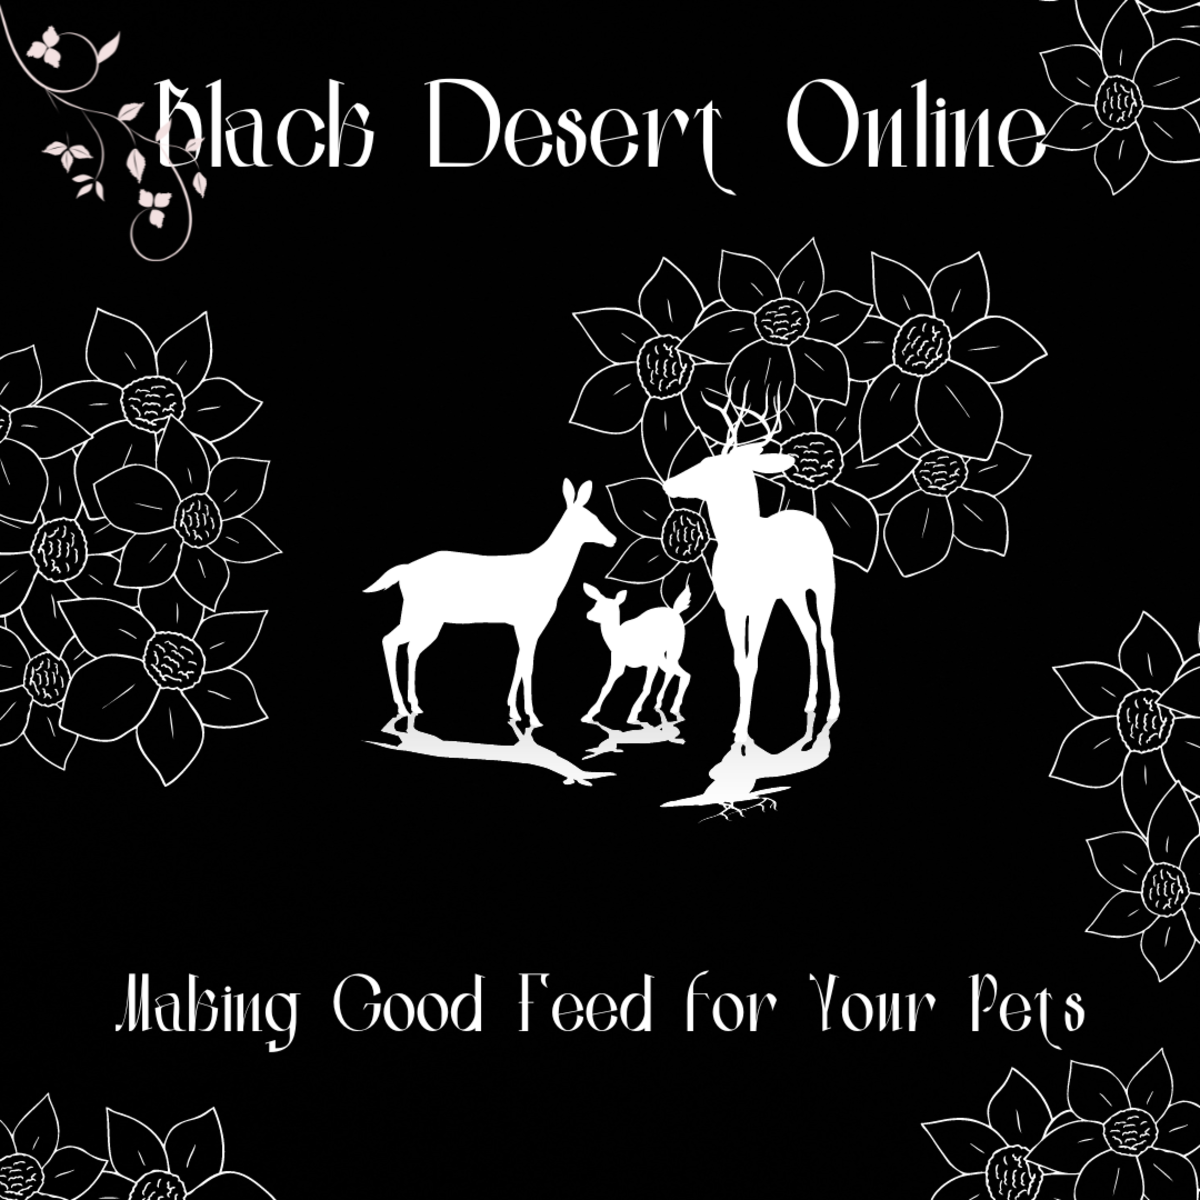 Making good feed for your pets in "Black Desert Online."